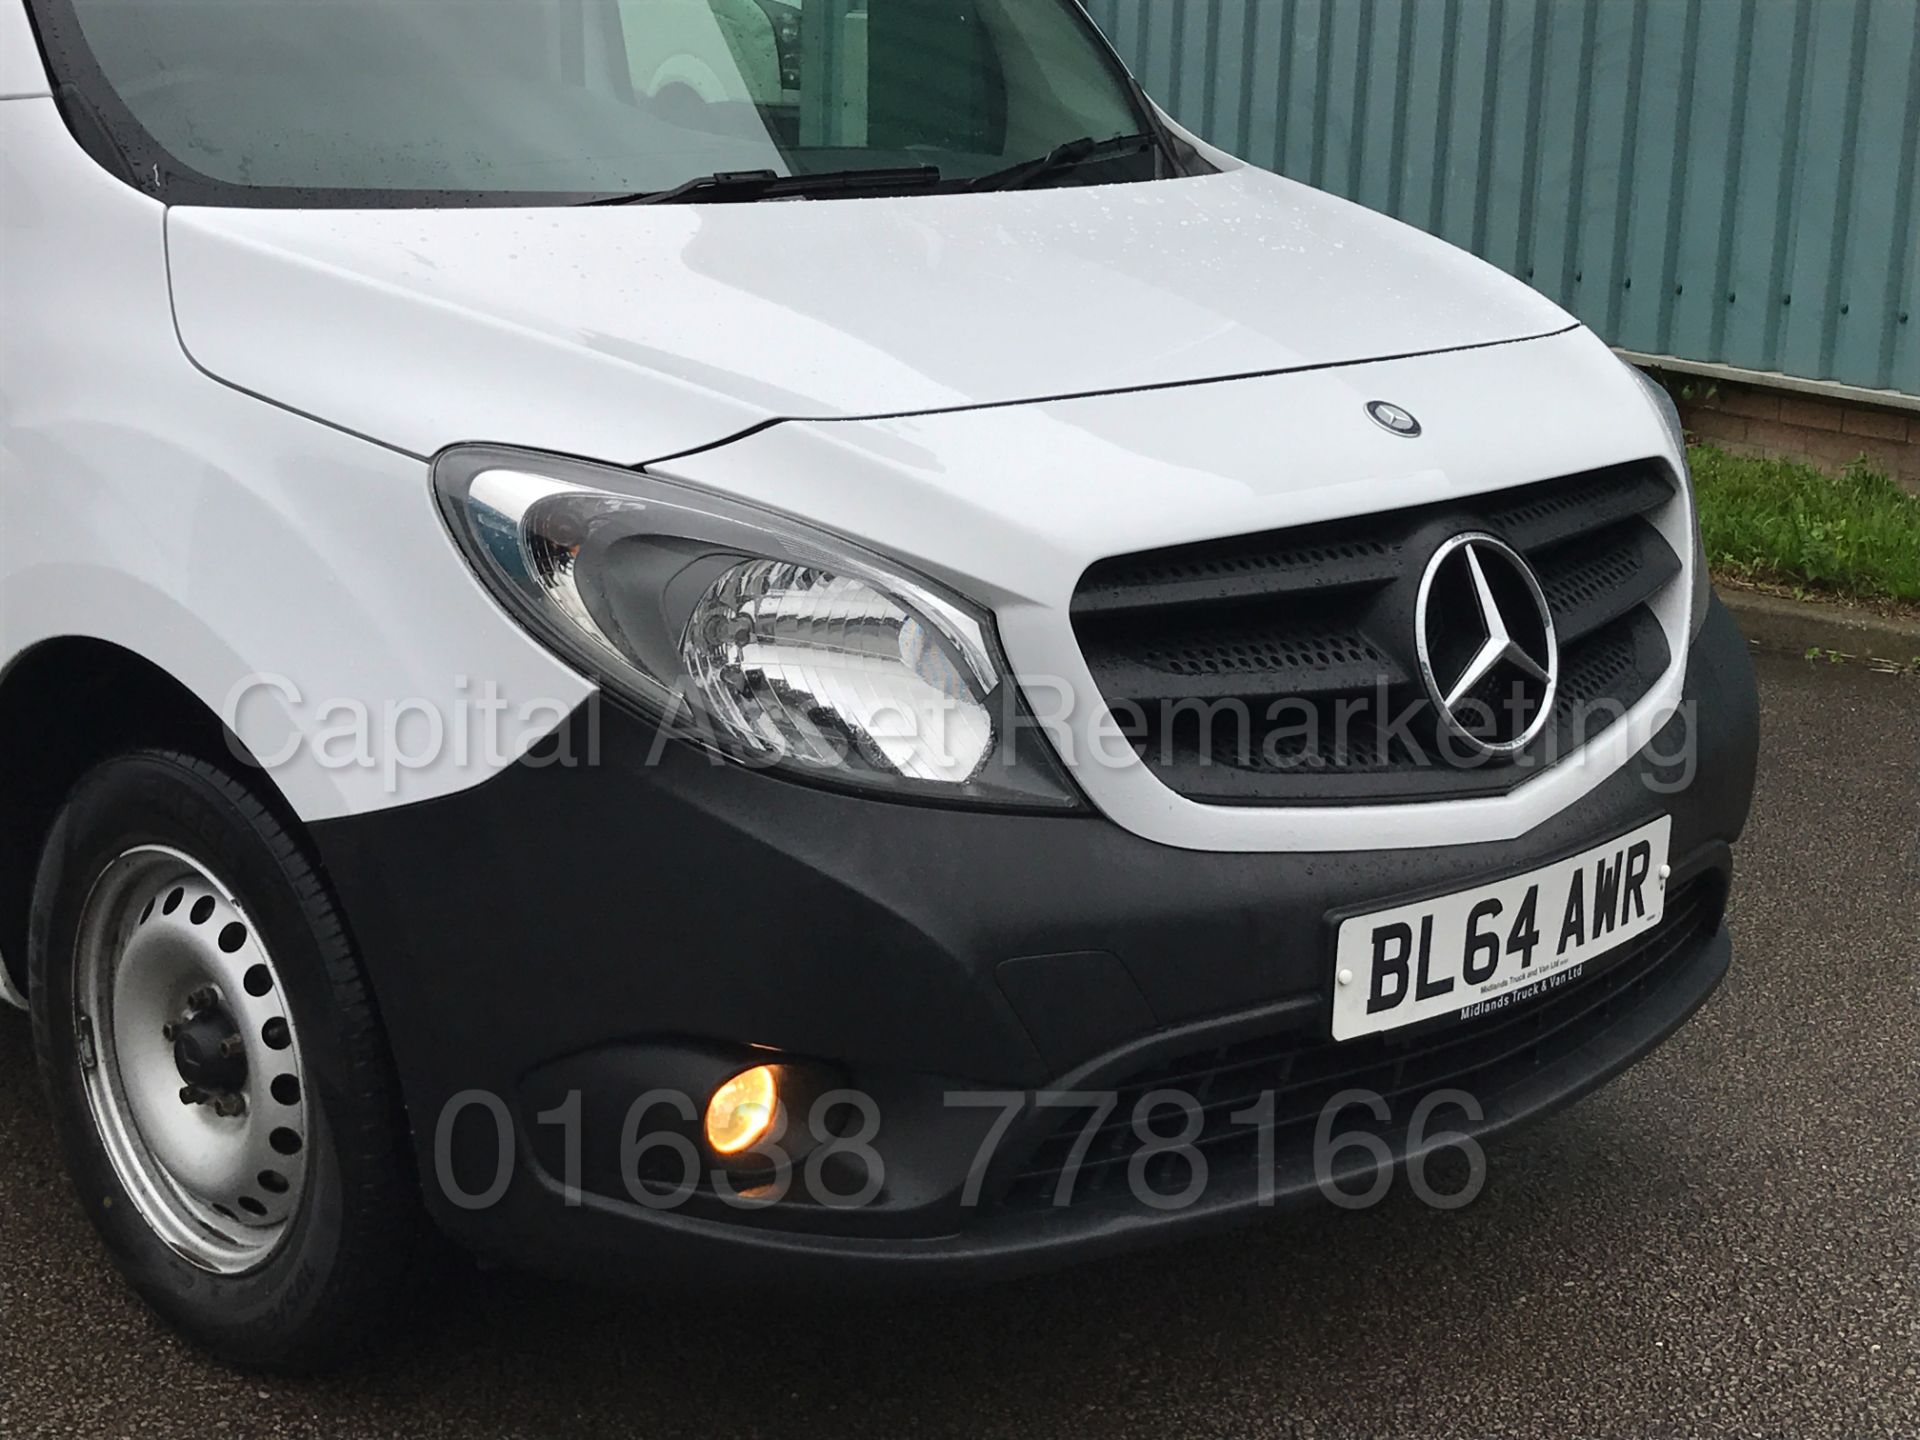 MERCEDES-BENZ CITAN 109 CDI LWB (2015 MODEL) '1.5 CDI - 90 BHP' (1 COMPANY OWNER FROM NEW) - Image 11 of 25